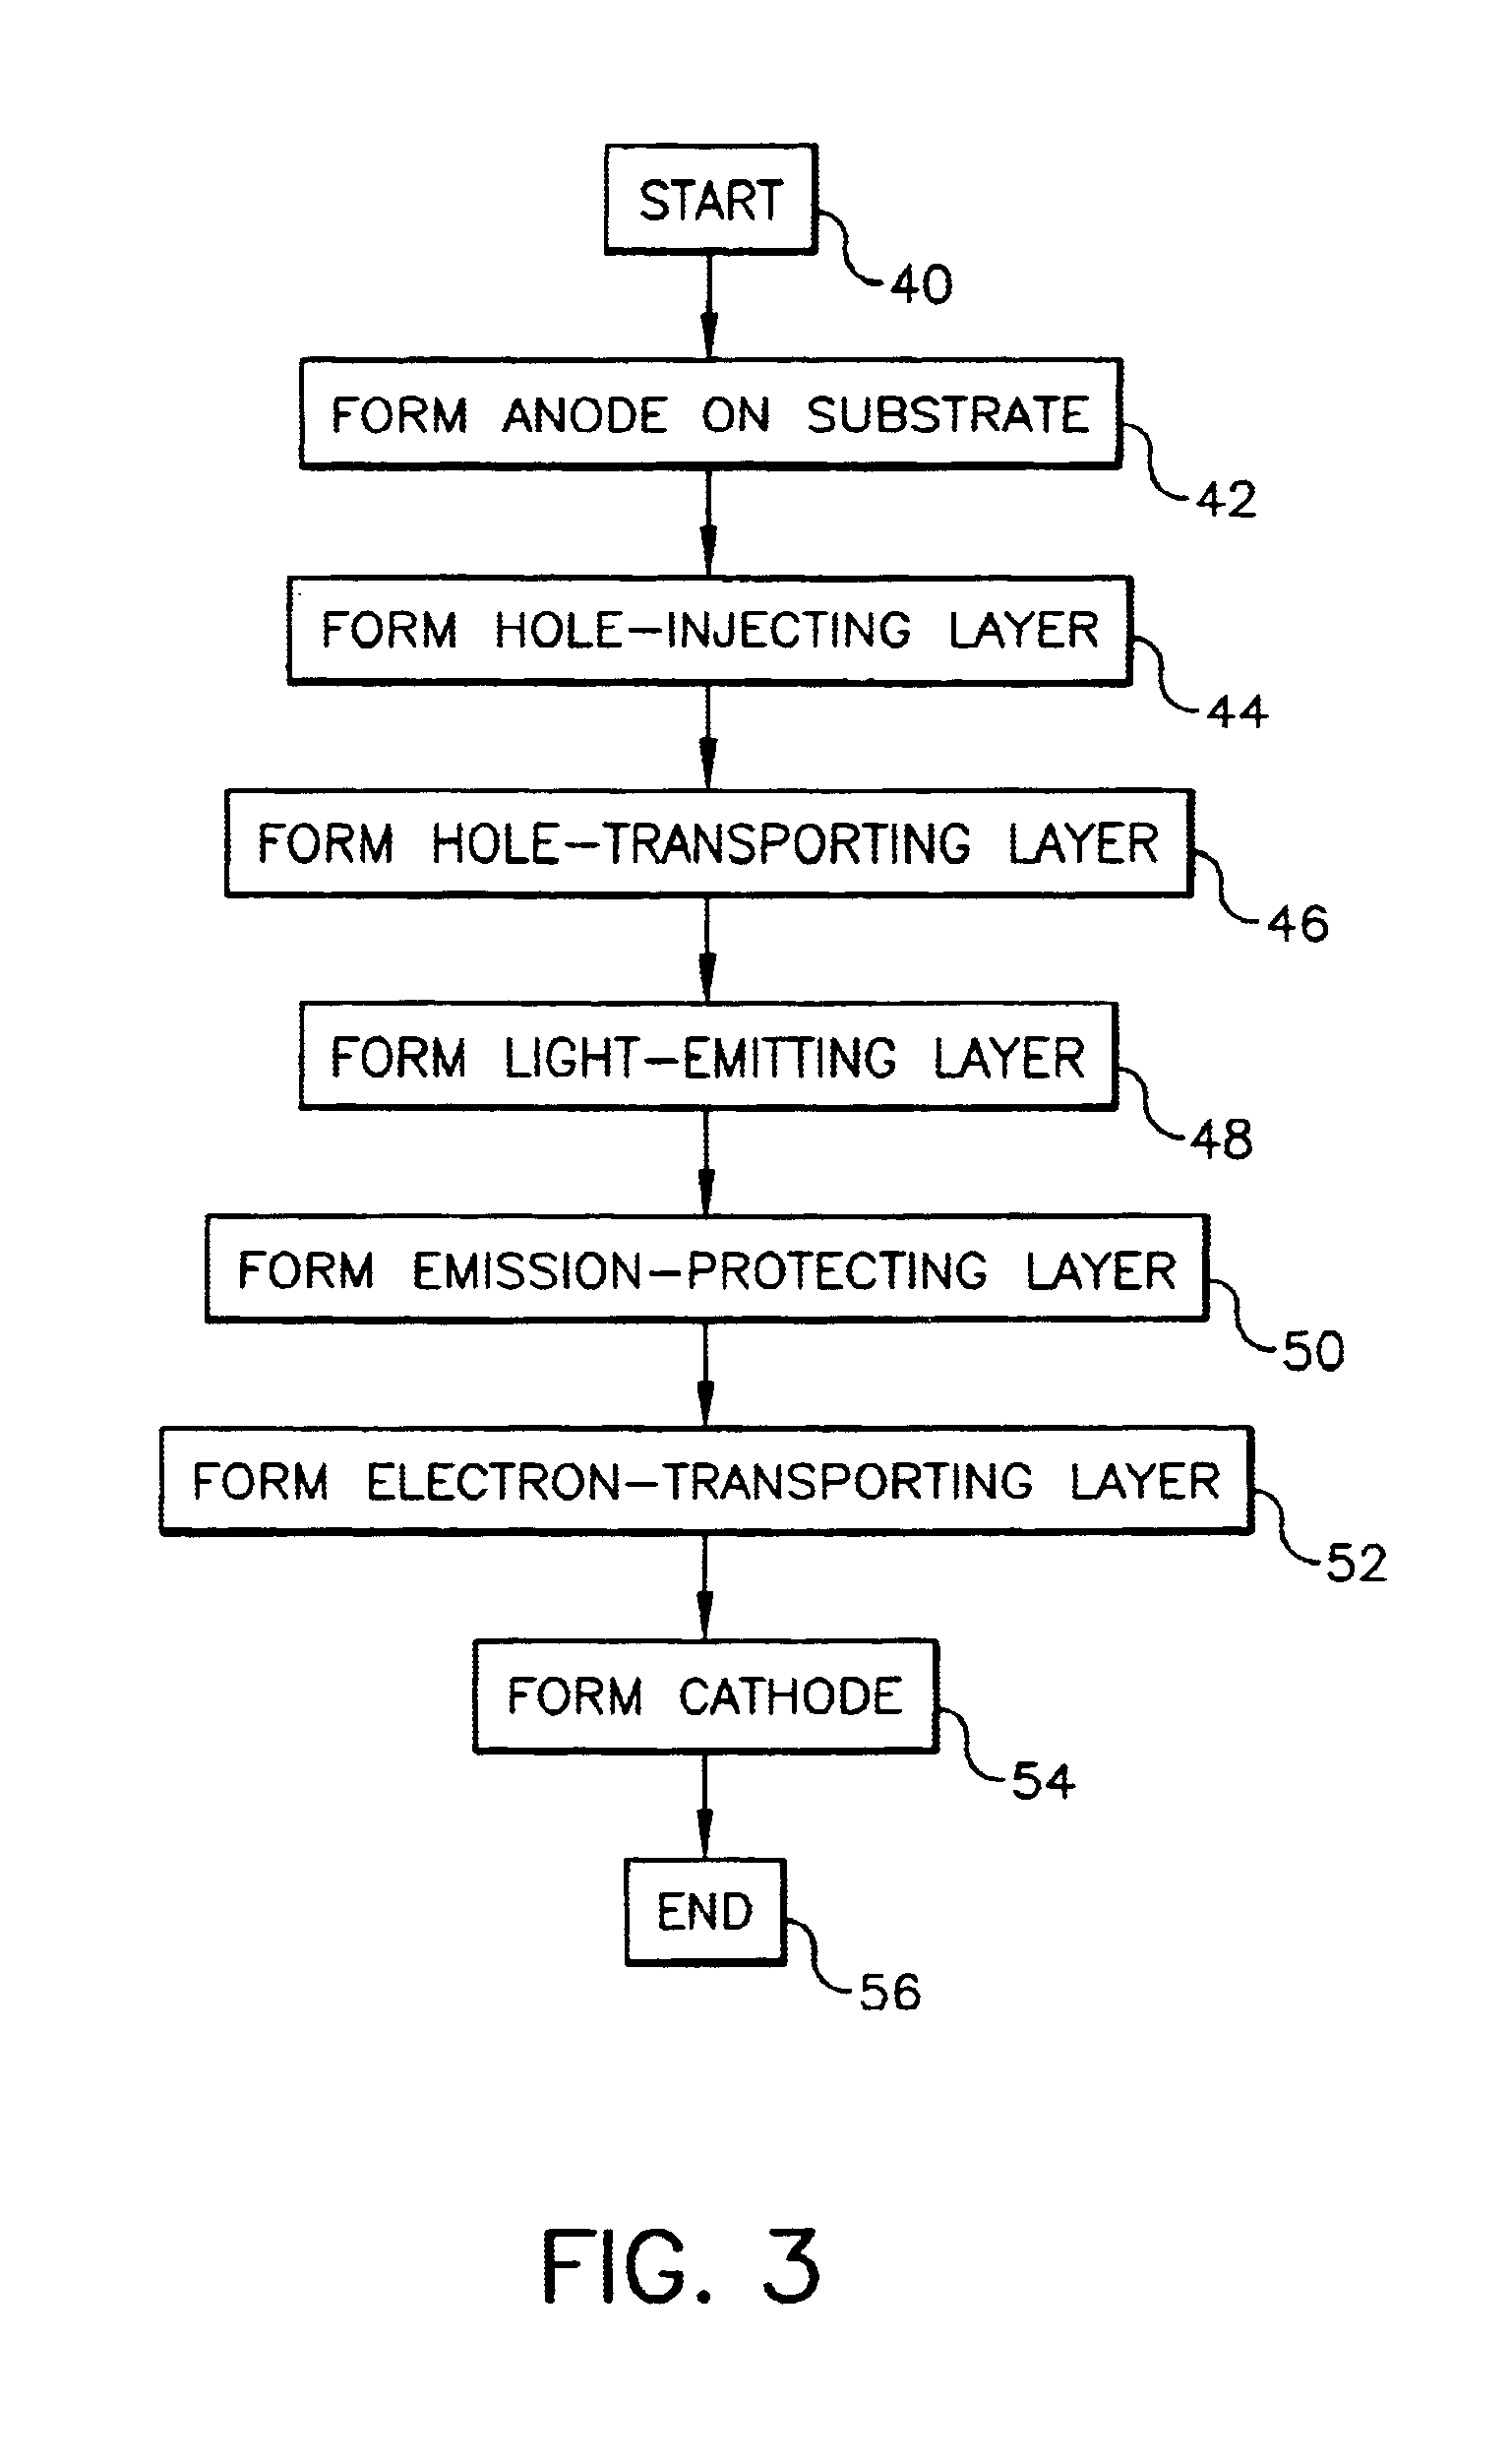 Providing an emission-protecting layer in an OLED device